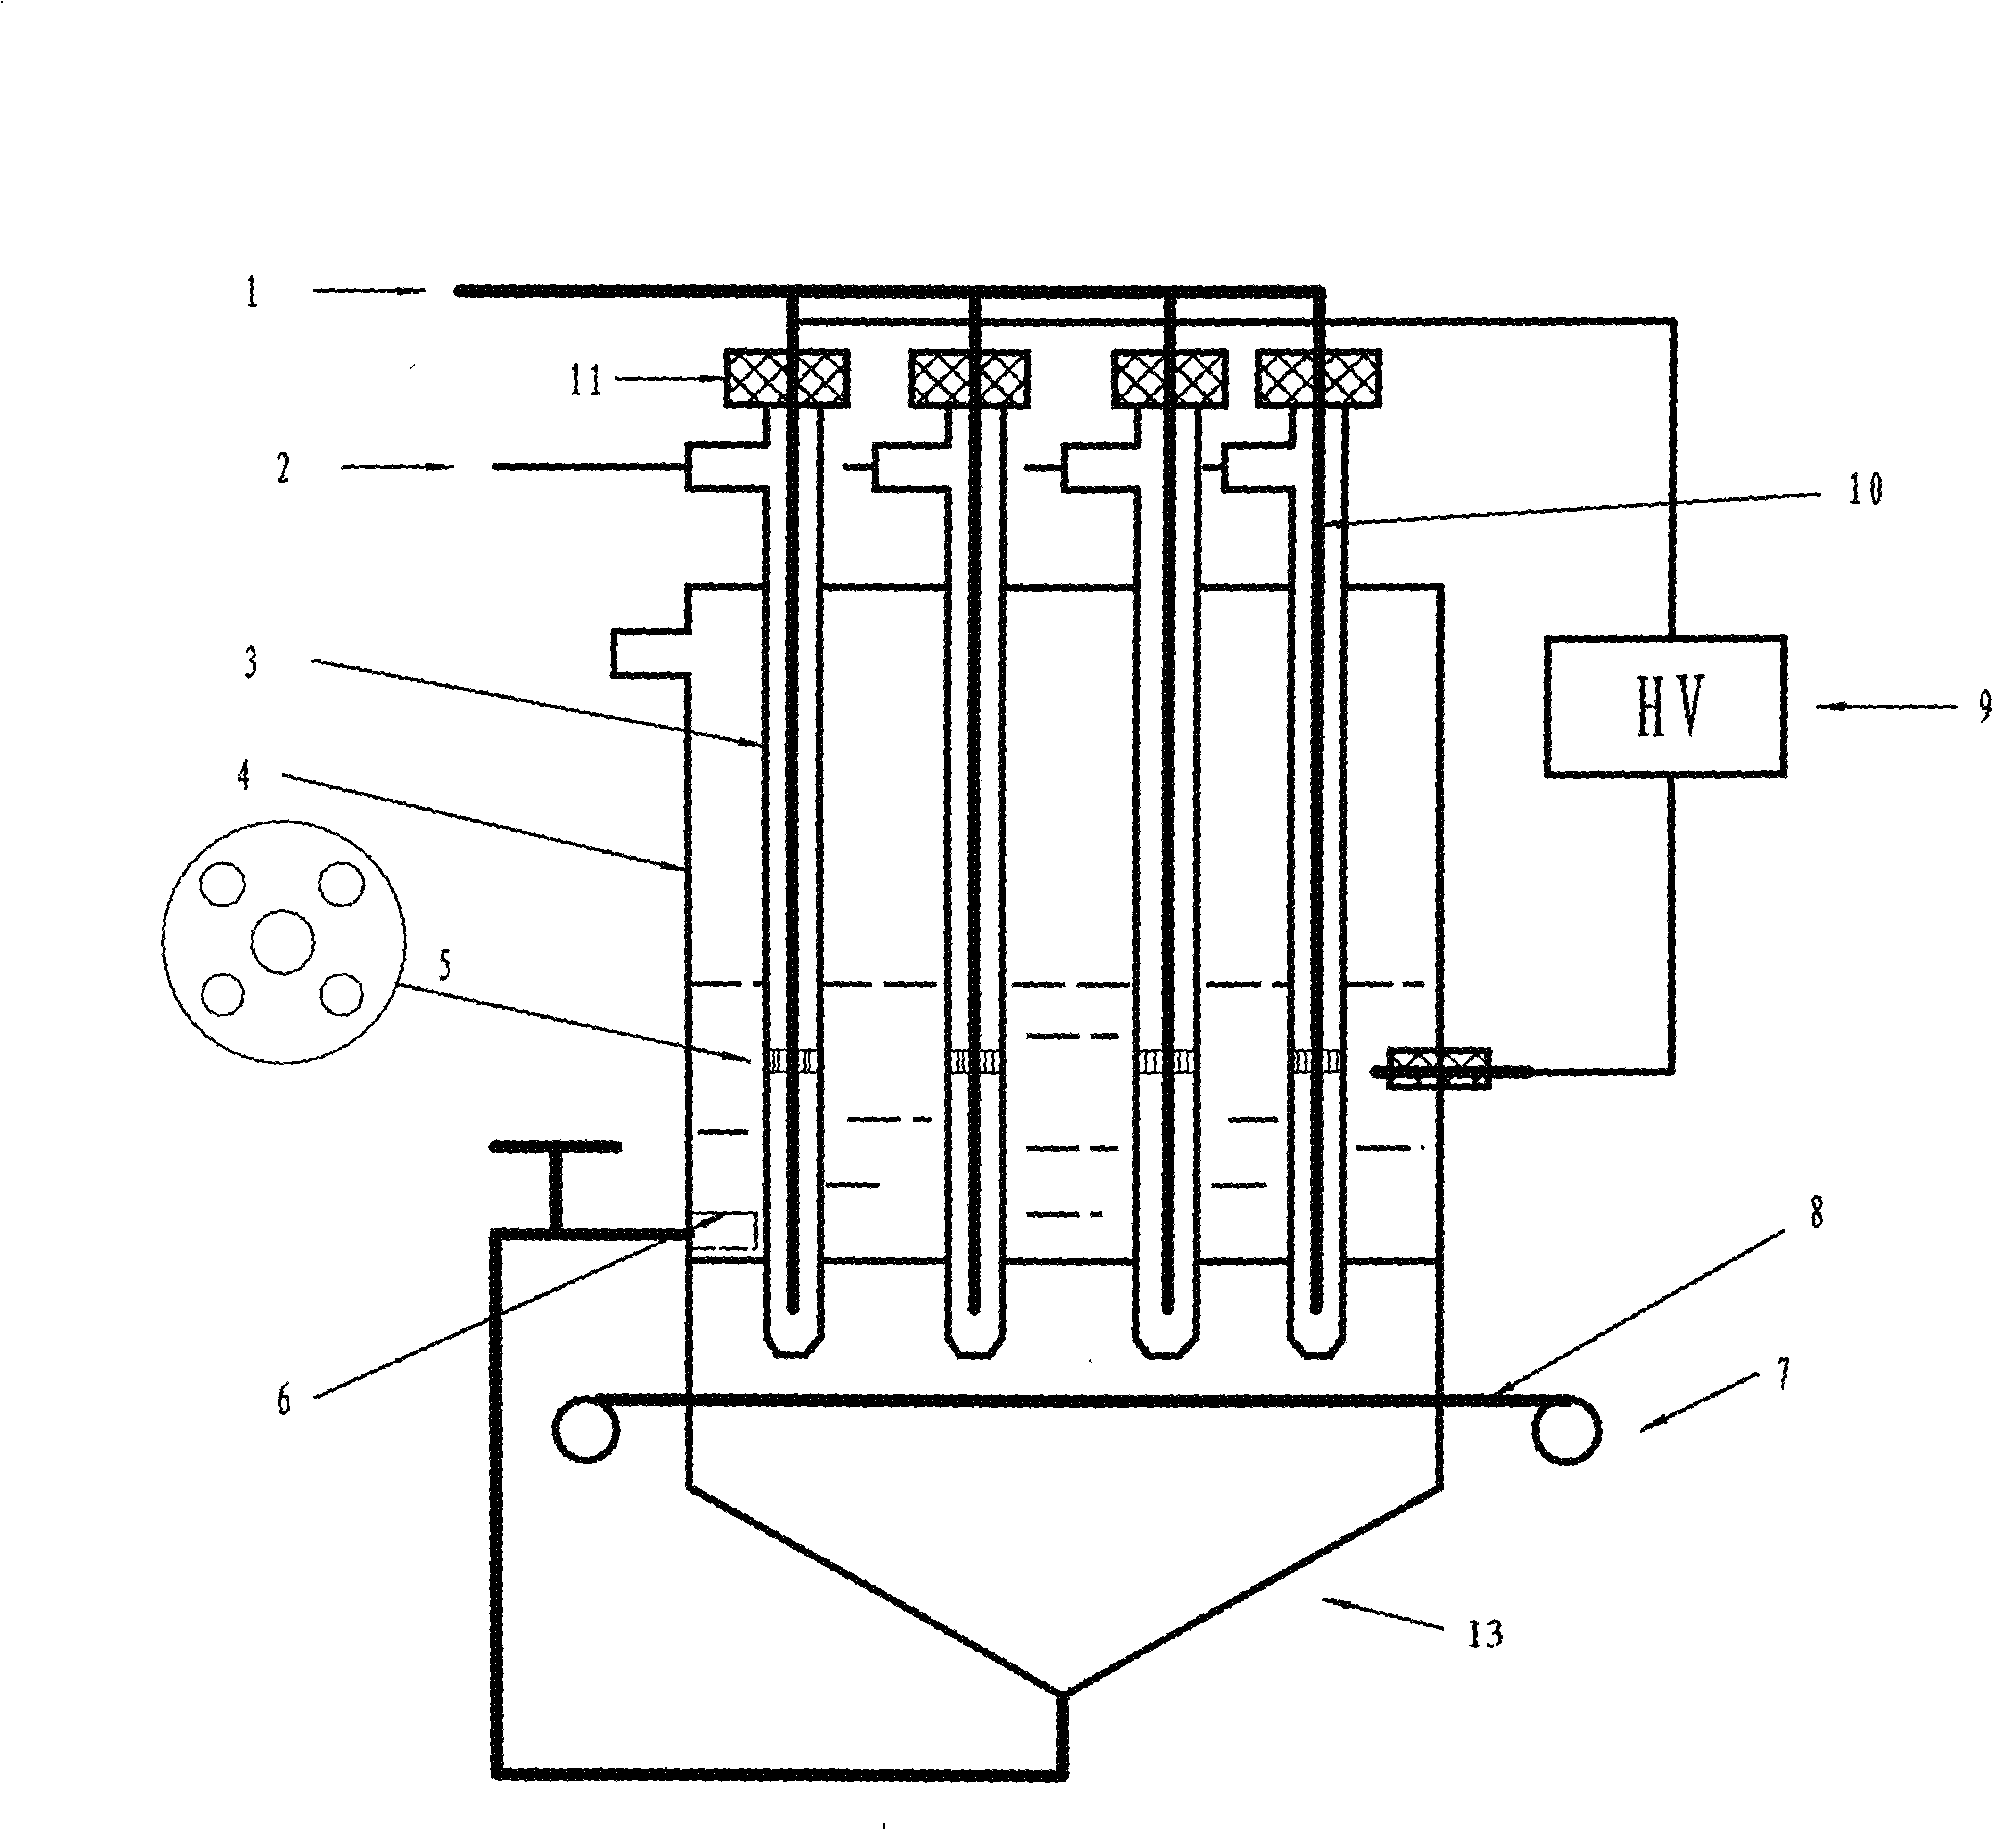 Room-temperature plasma torch array device simultaneously carrying out fiber yarn modification and sewage treatment